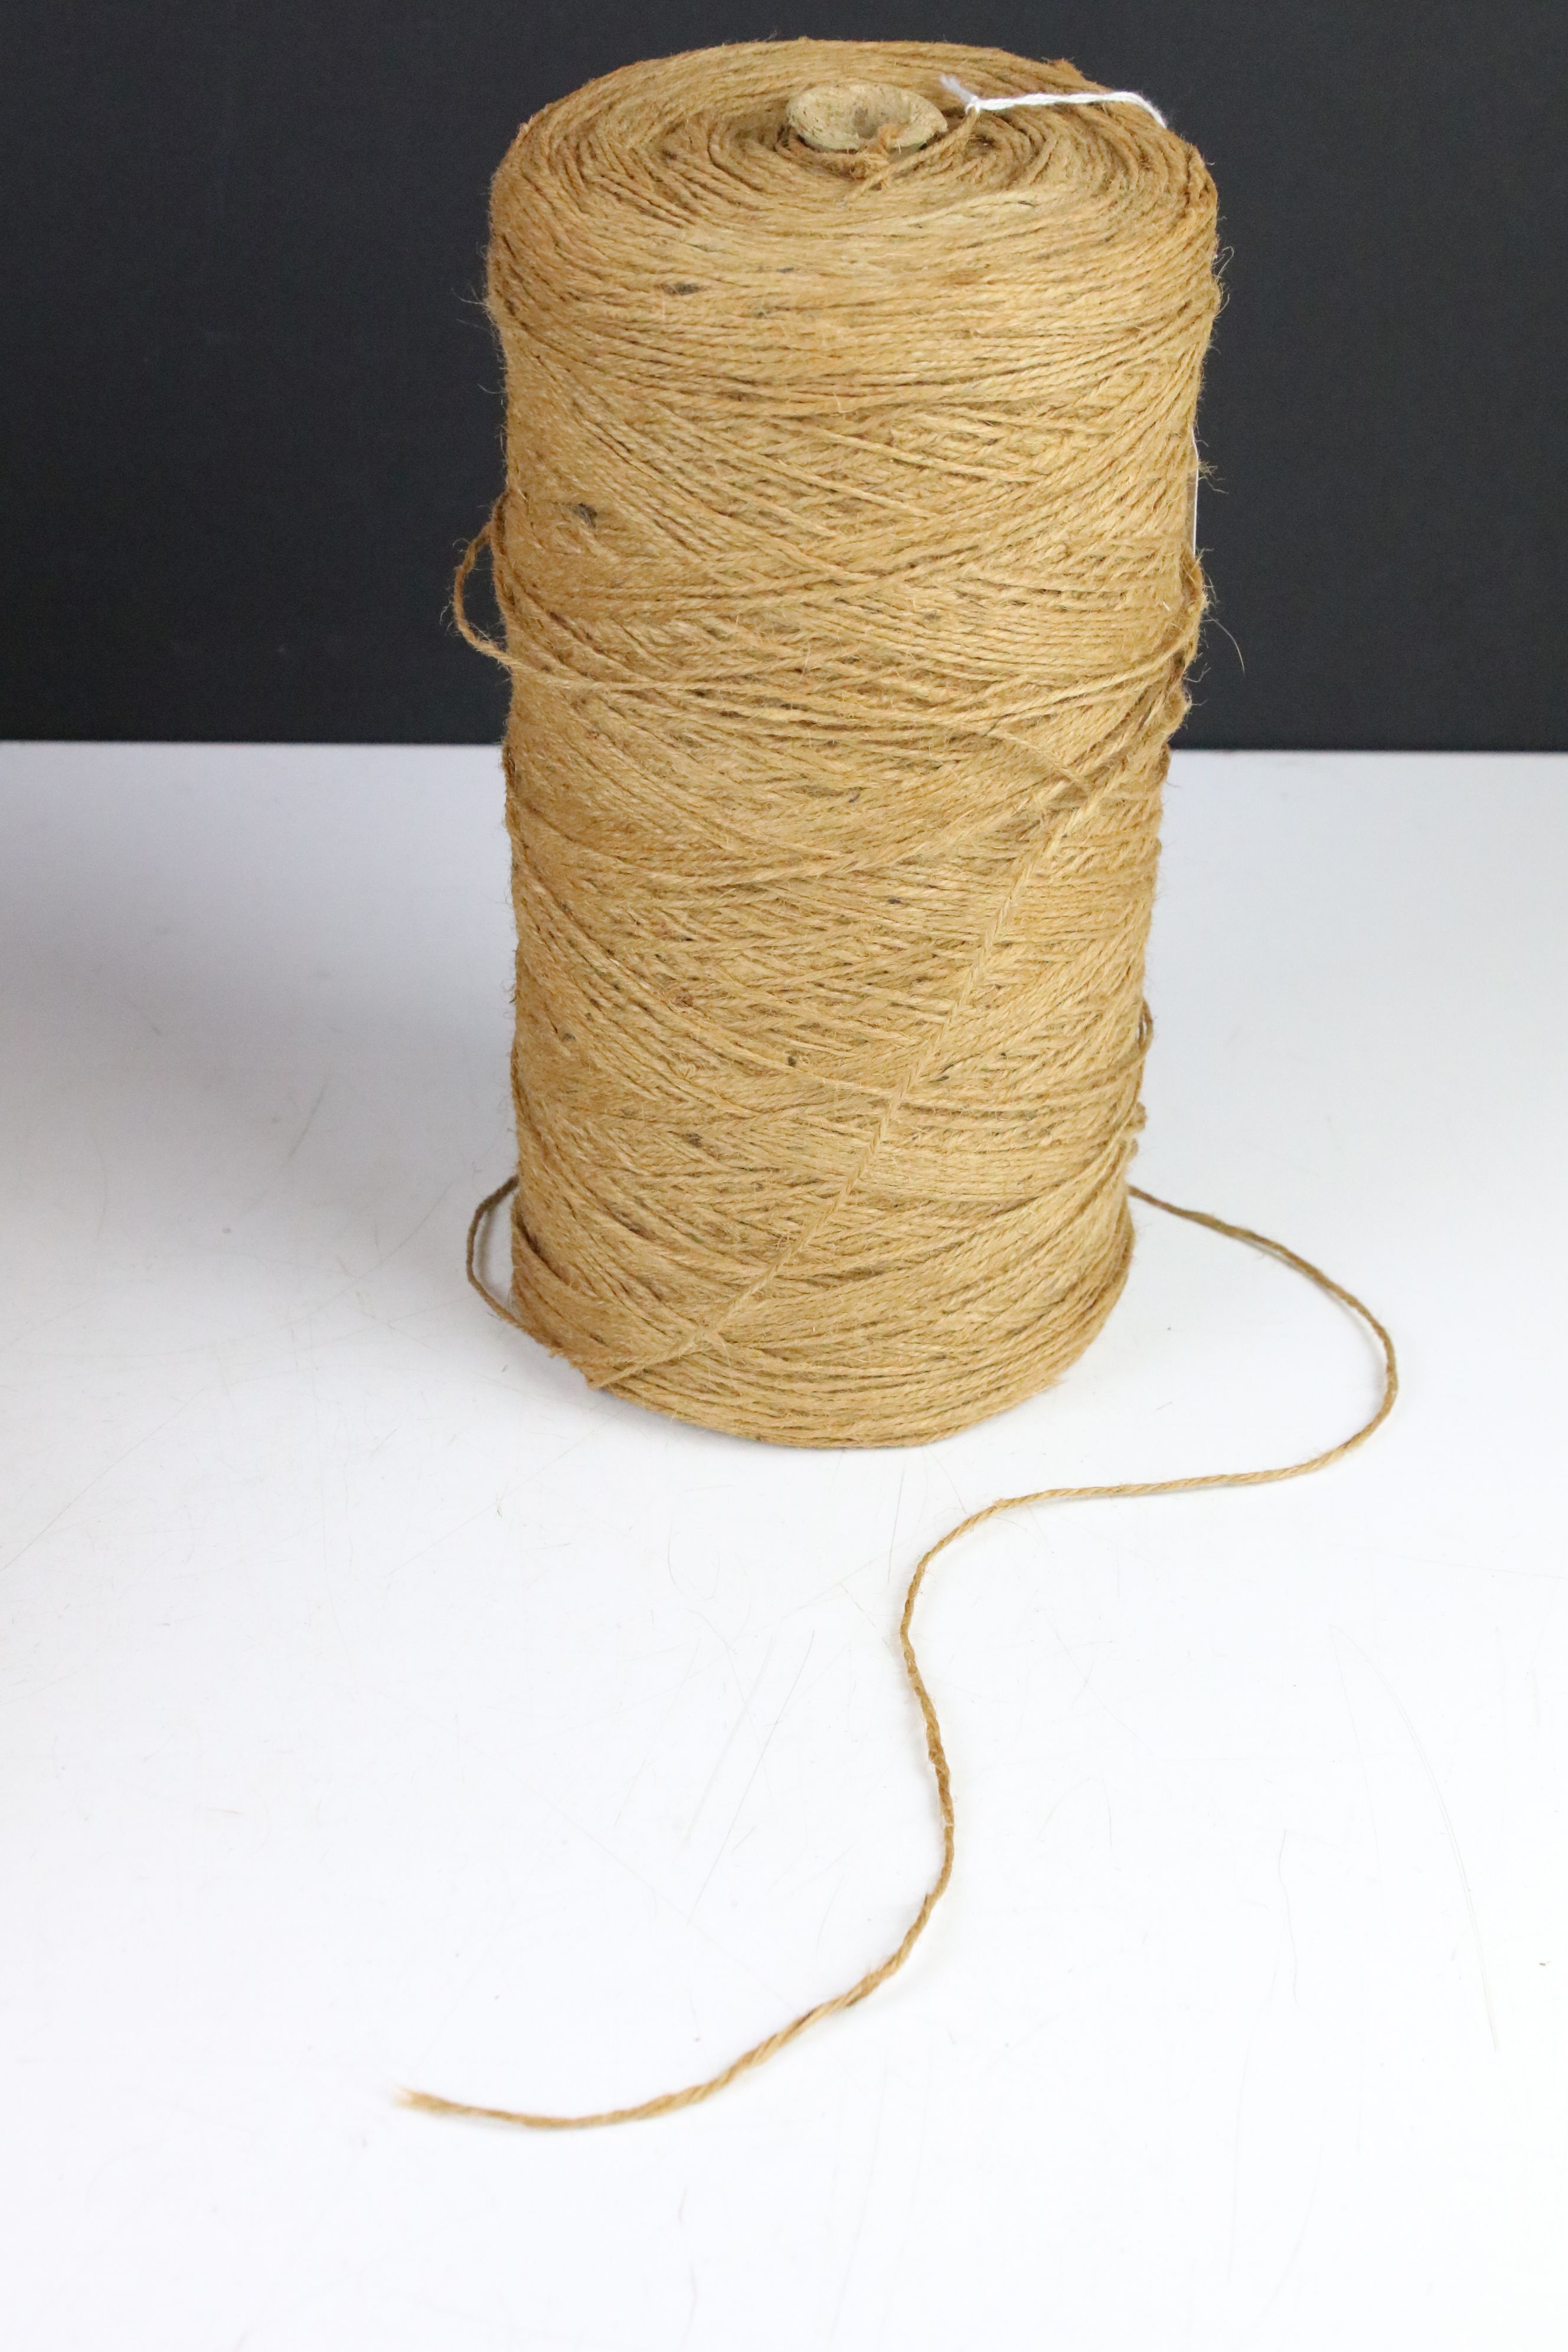 A vintage ball of brown string together with a roll of rope. - Image 3 of 3